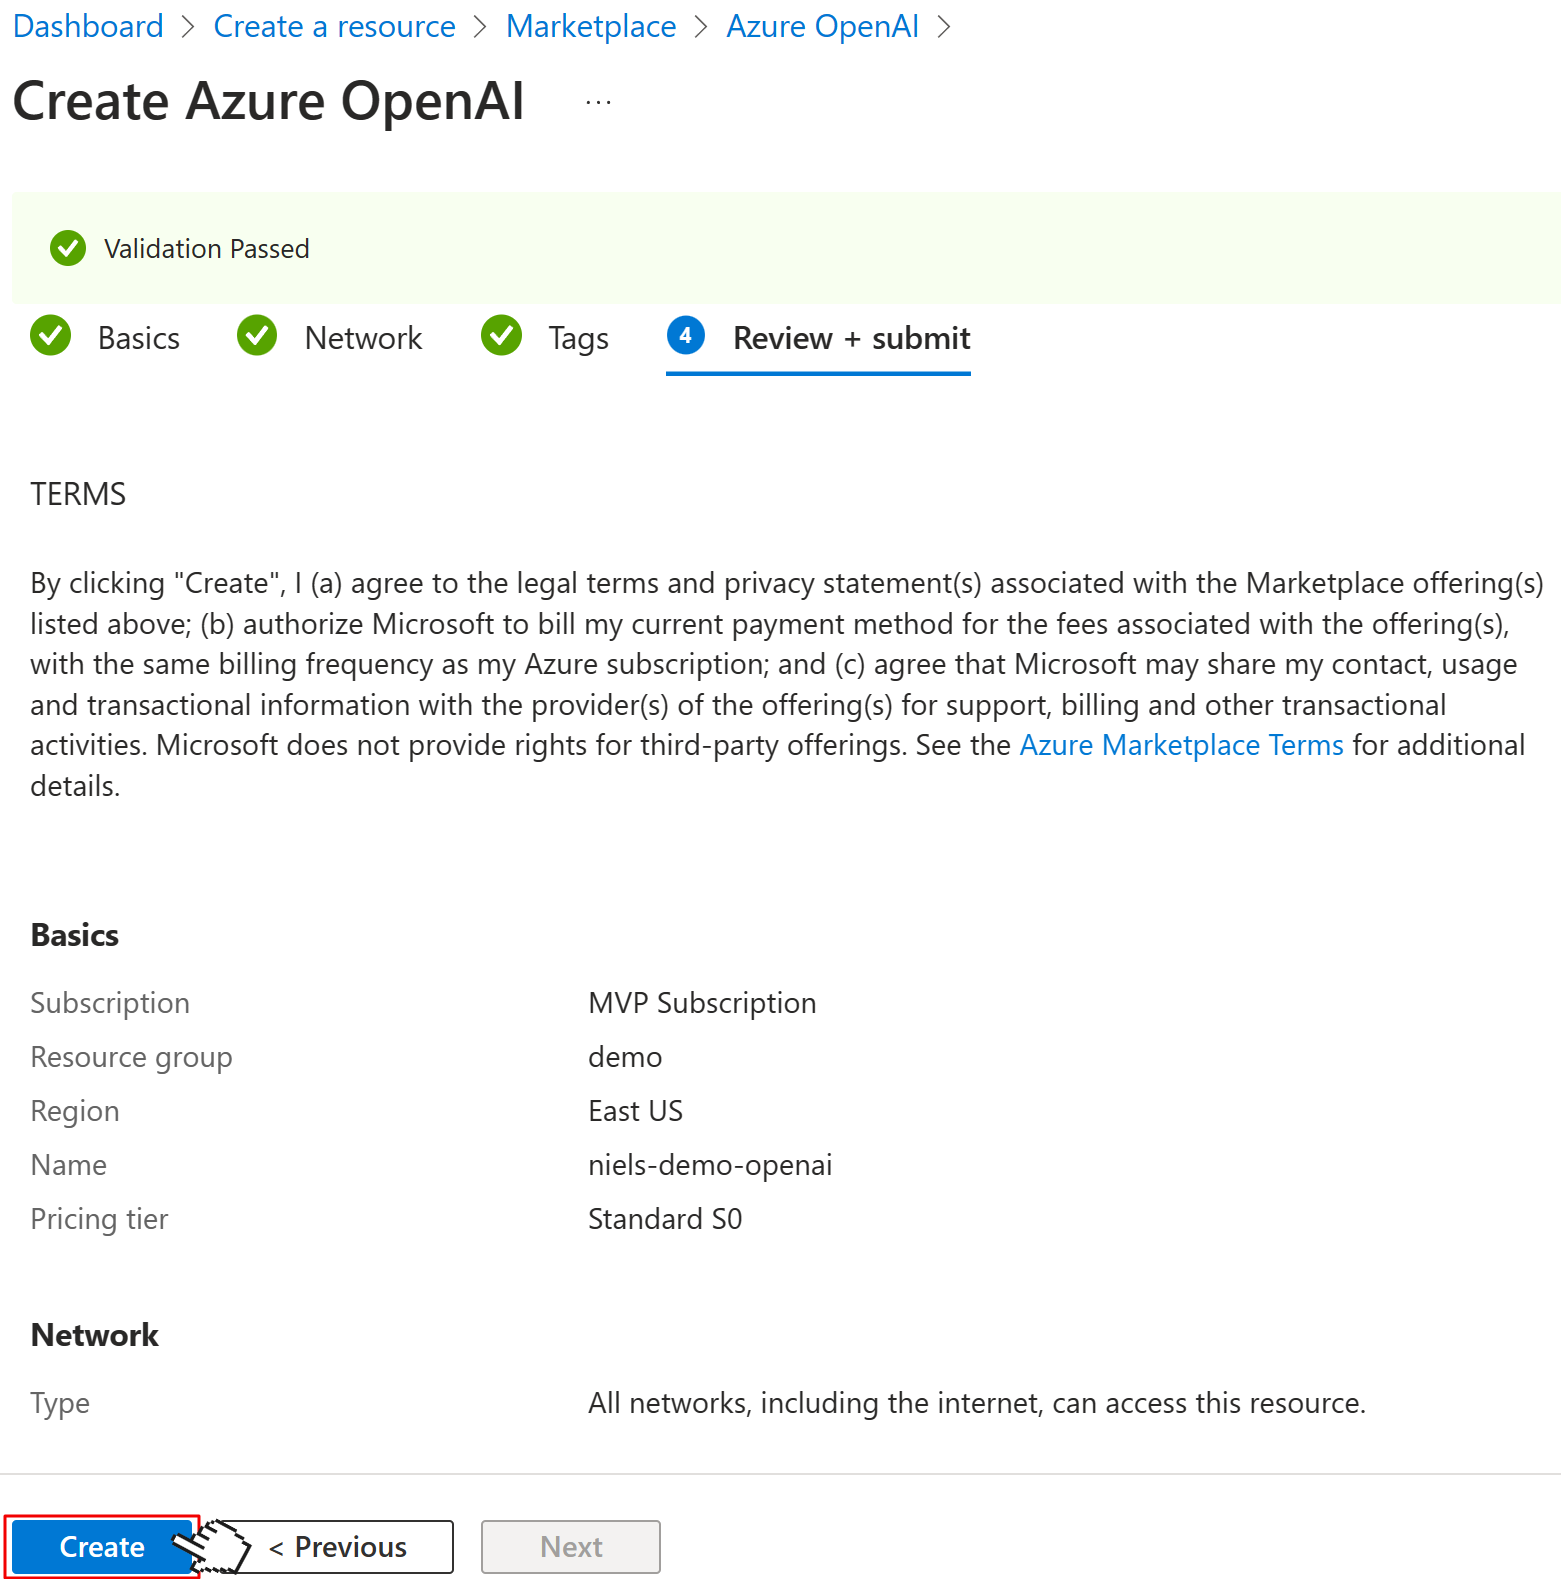 Create Azure OpenAI Review + submit dialog, showing an overview of the resource to be created. User clicks on Create button.